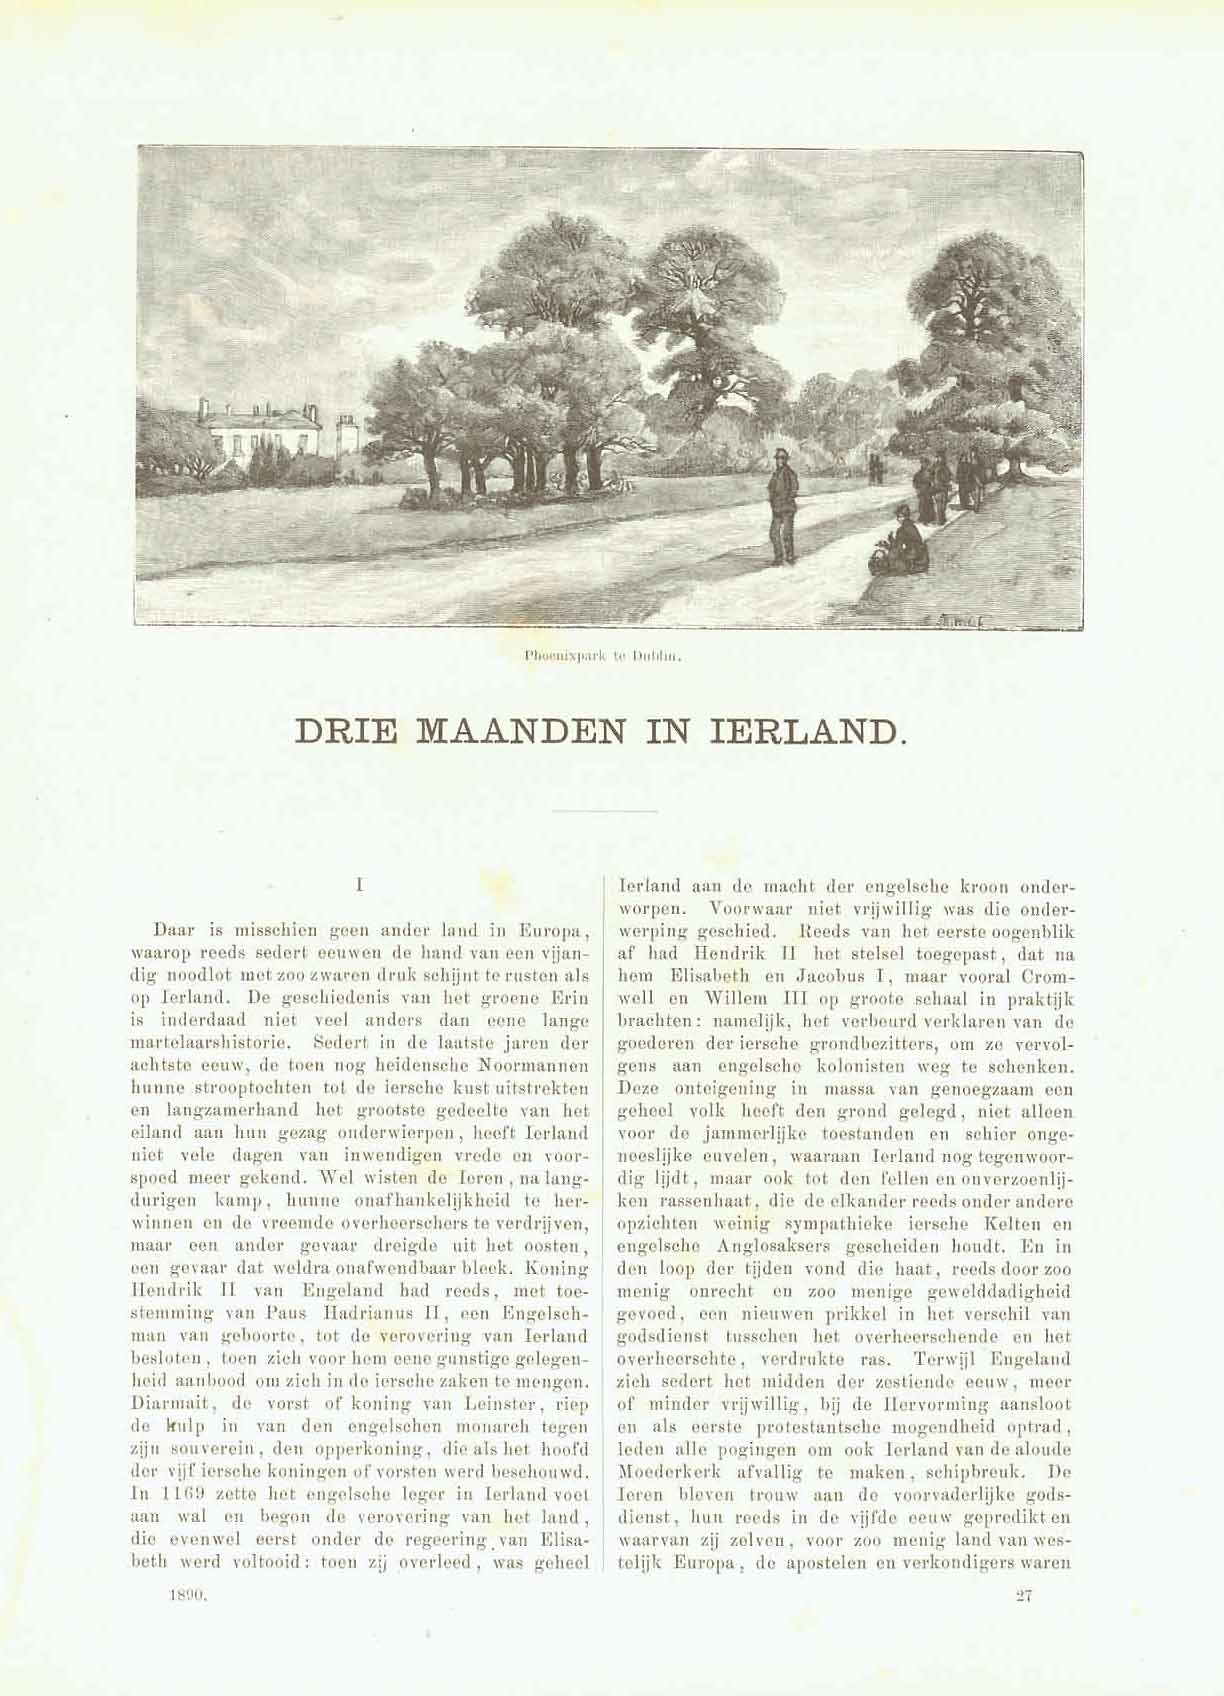 Image: Bloemen meisje te Dublin"  Article from a Dutch source.  "Drie Maanden in Ierland"  Flower Girl  Two separate pages with Dutch text on both sides of each page. The text is not quite complete. Historical information about Ireland.  Original antique print 